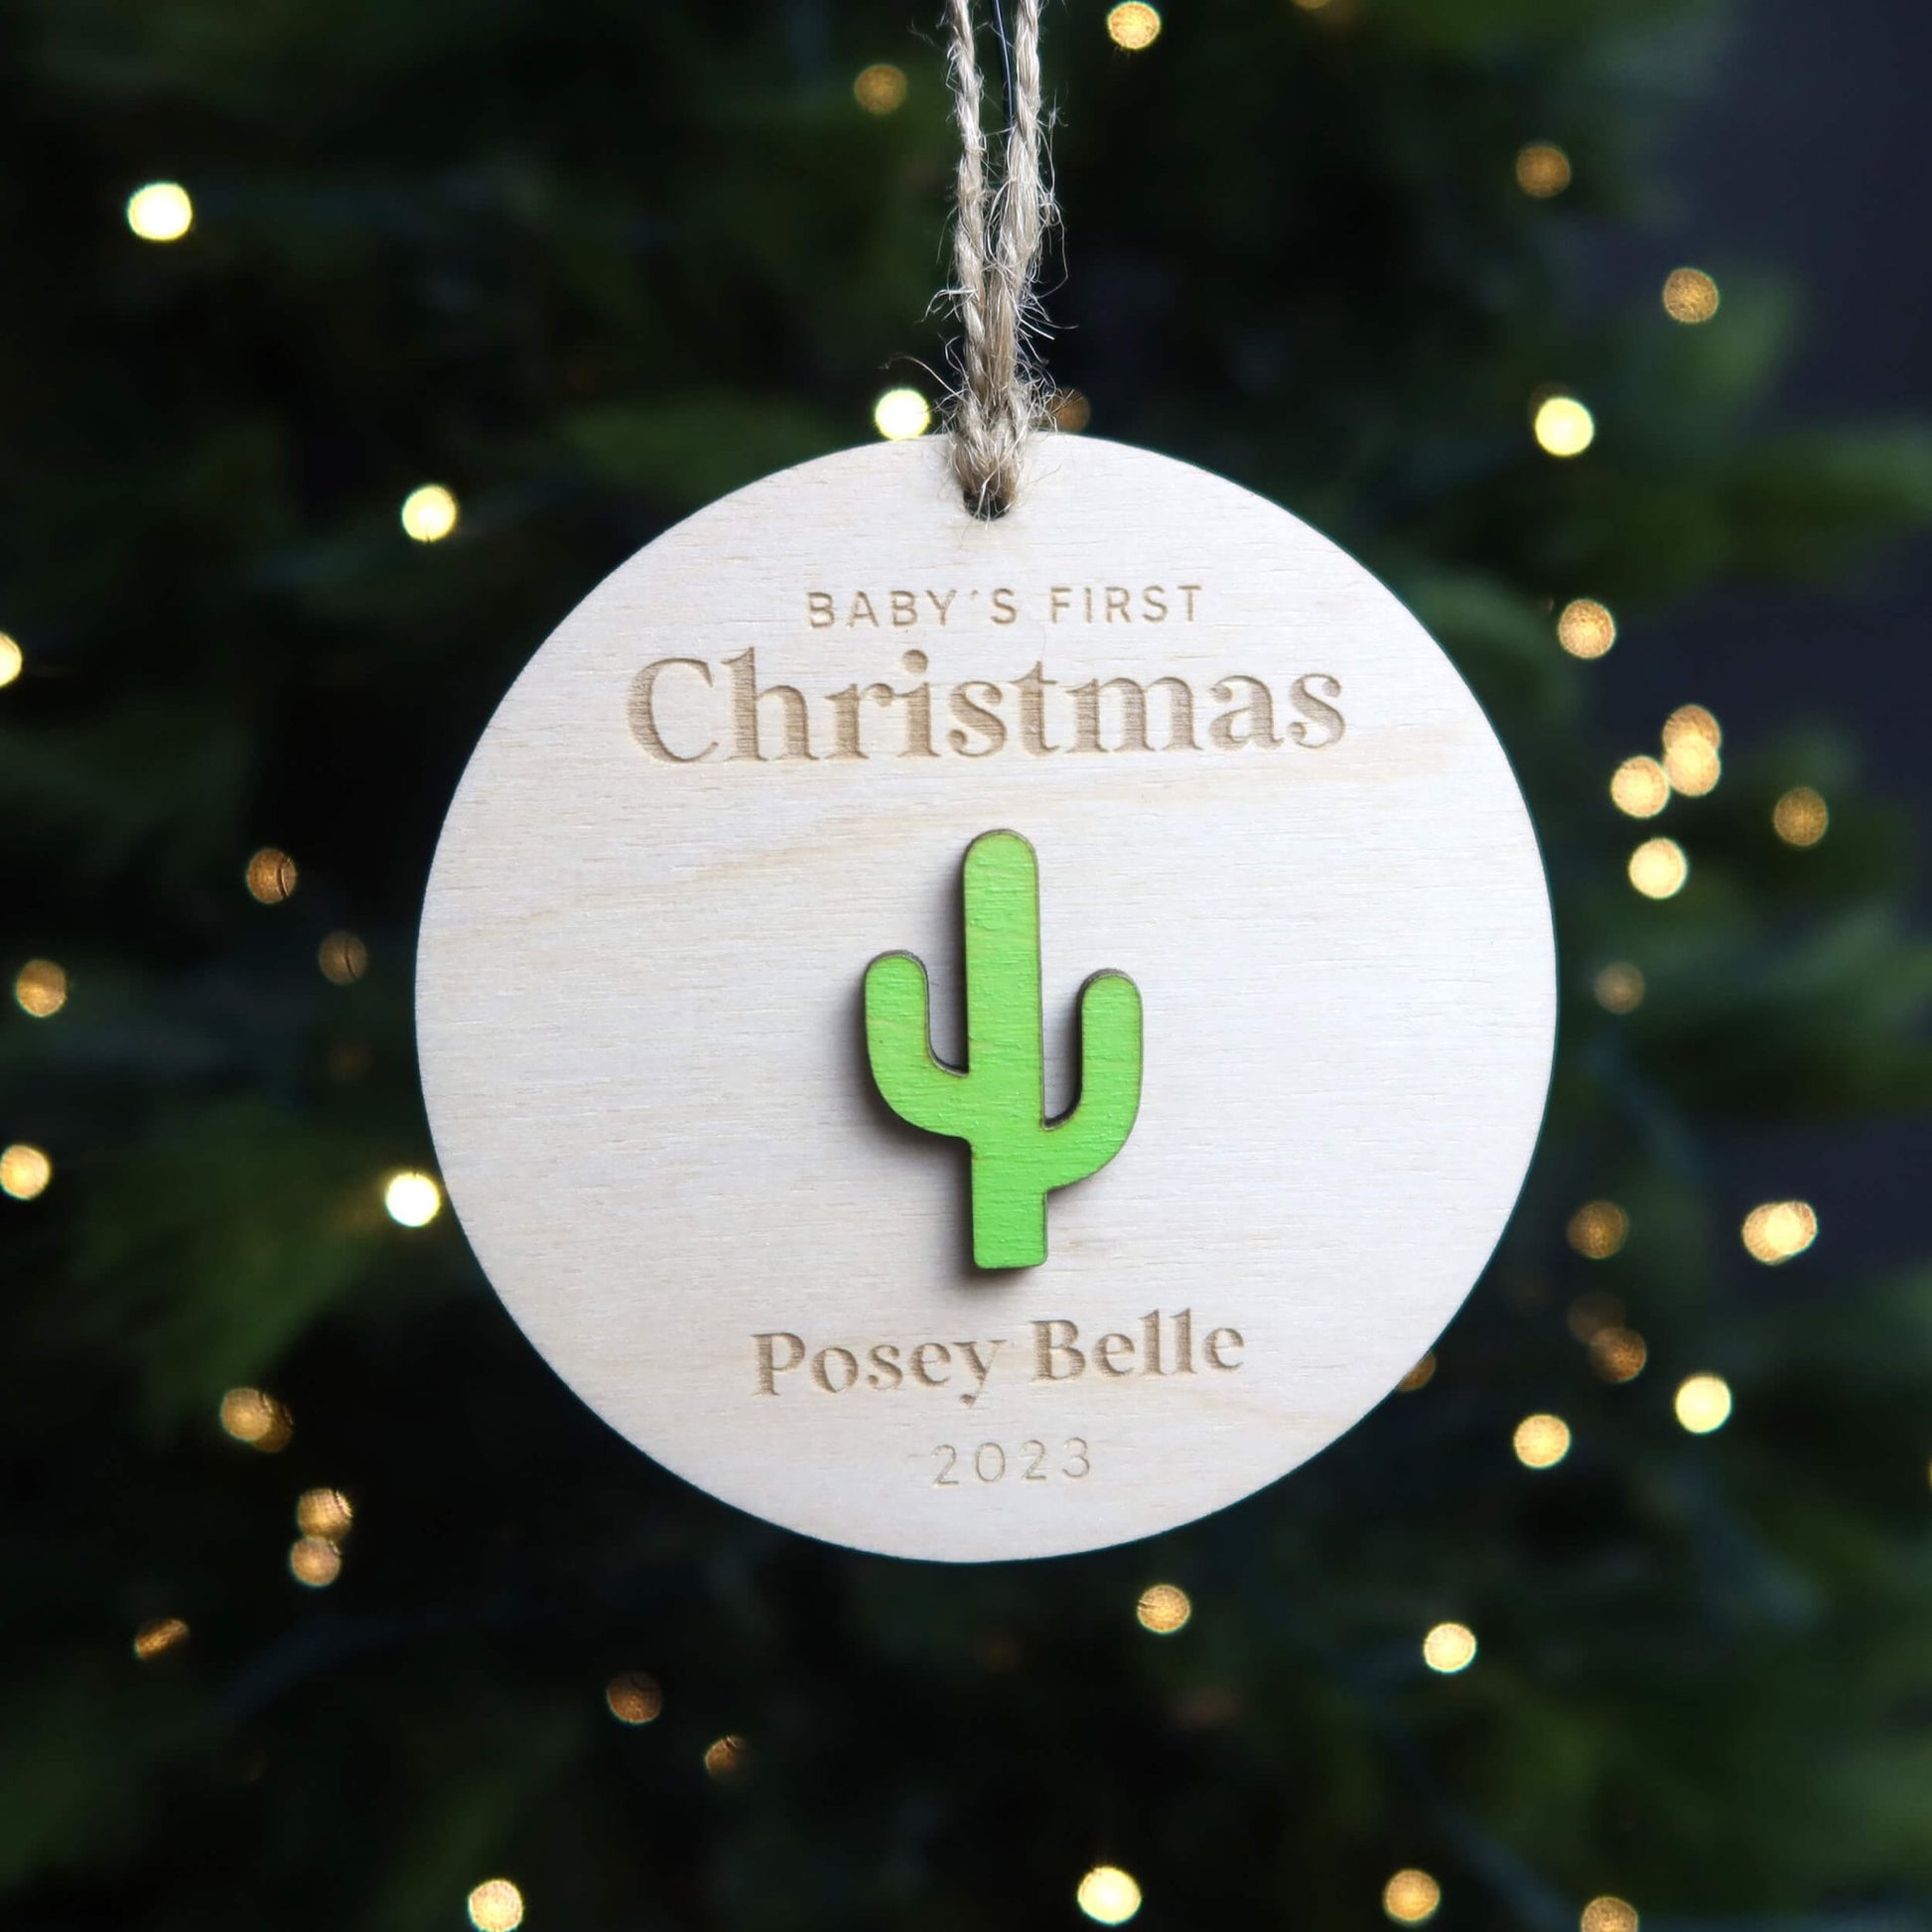 Cactus Baby's First Christmas Ornament Personalized - Holiday Ornaments - Moon Rock Prints